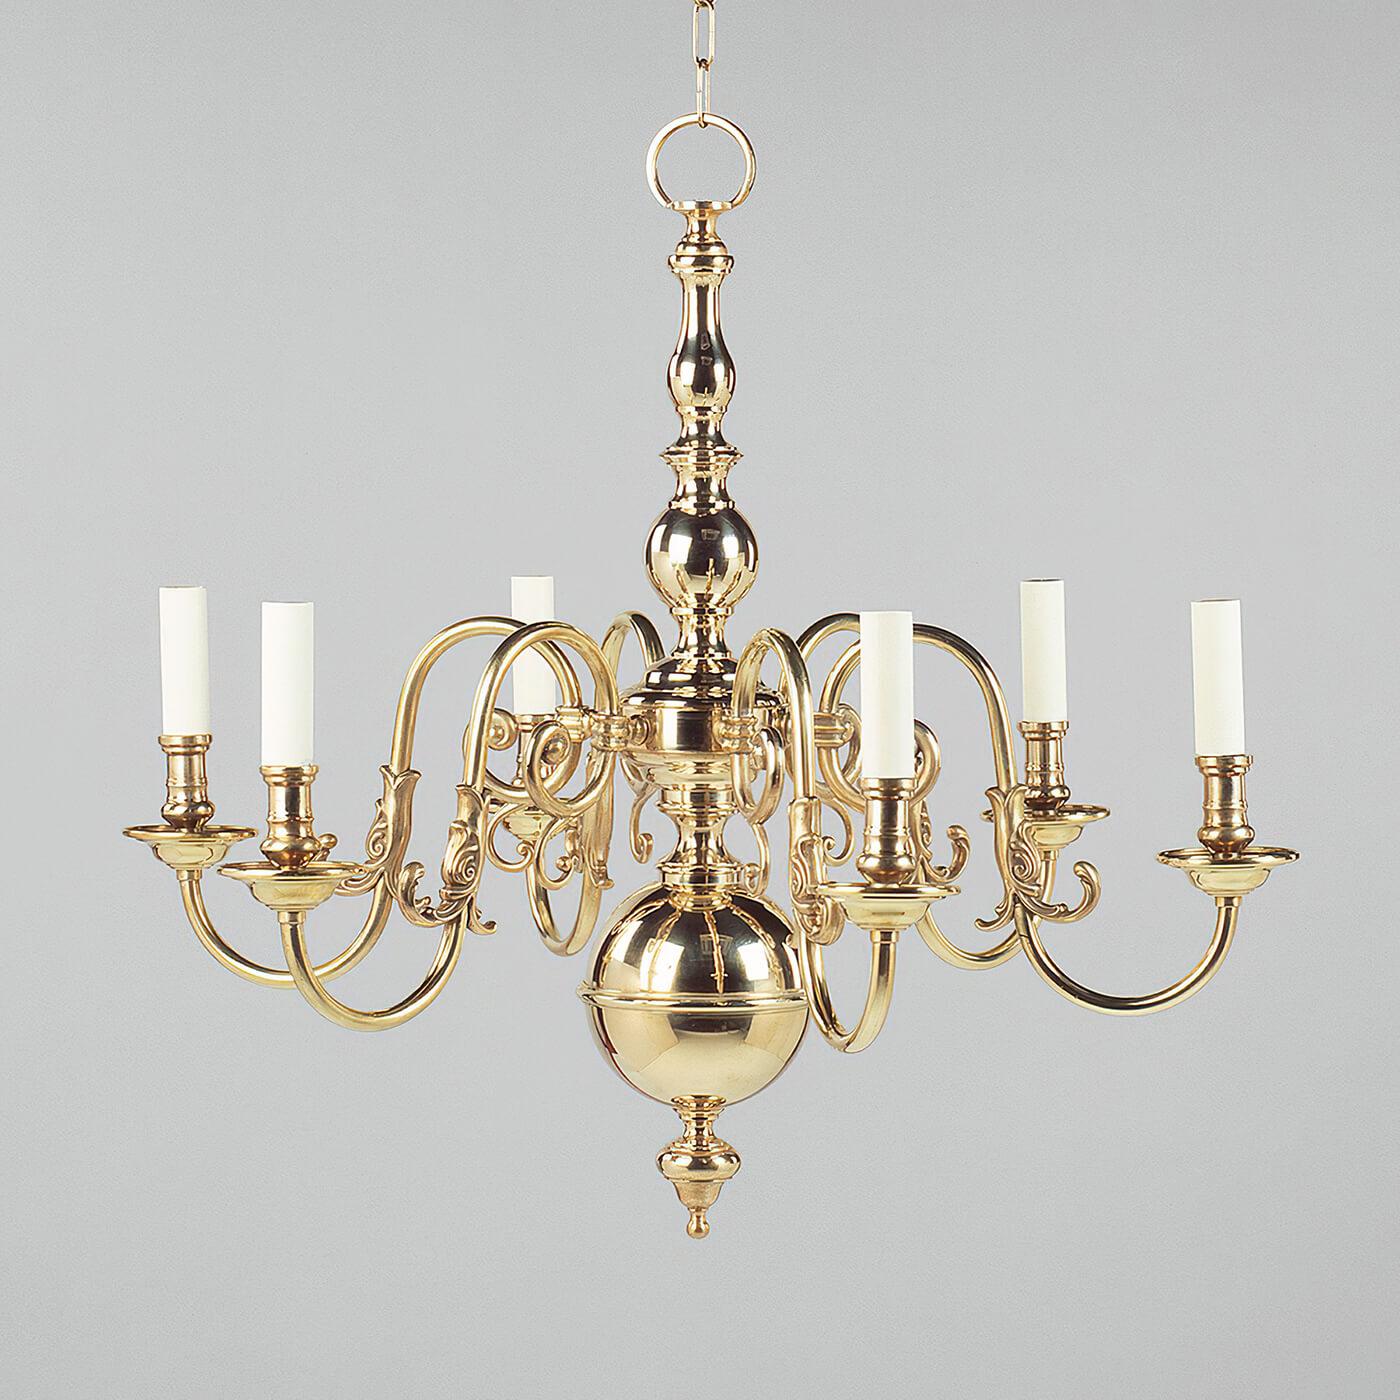 This chandelier is inspired by a dutch antique. The central stem comprised of brass spheres complements the leaf-like decoration on the upward-curving arms.

The chandelier is fabricated and soldered using solid cast brass components, ensuring the